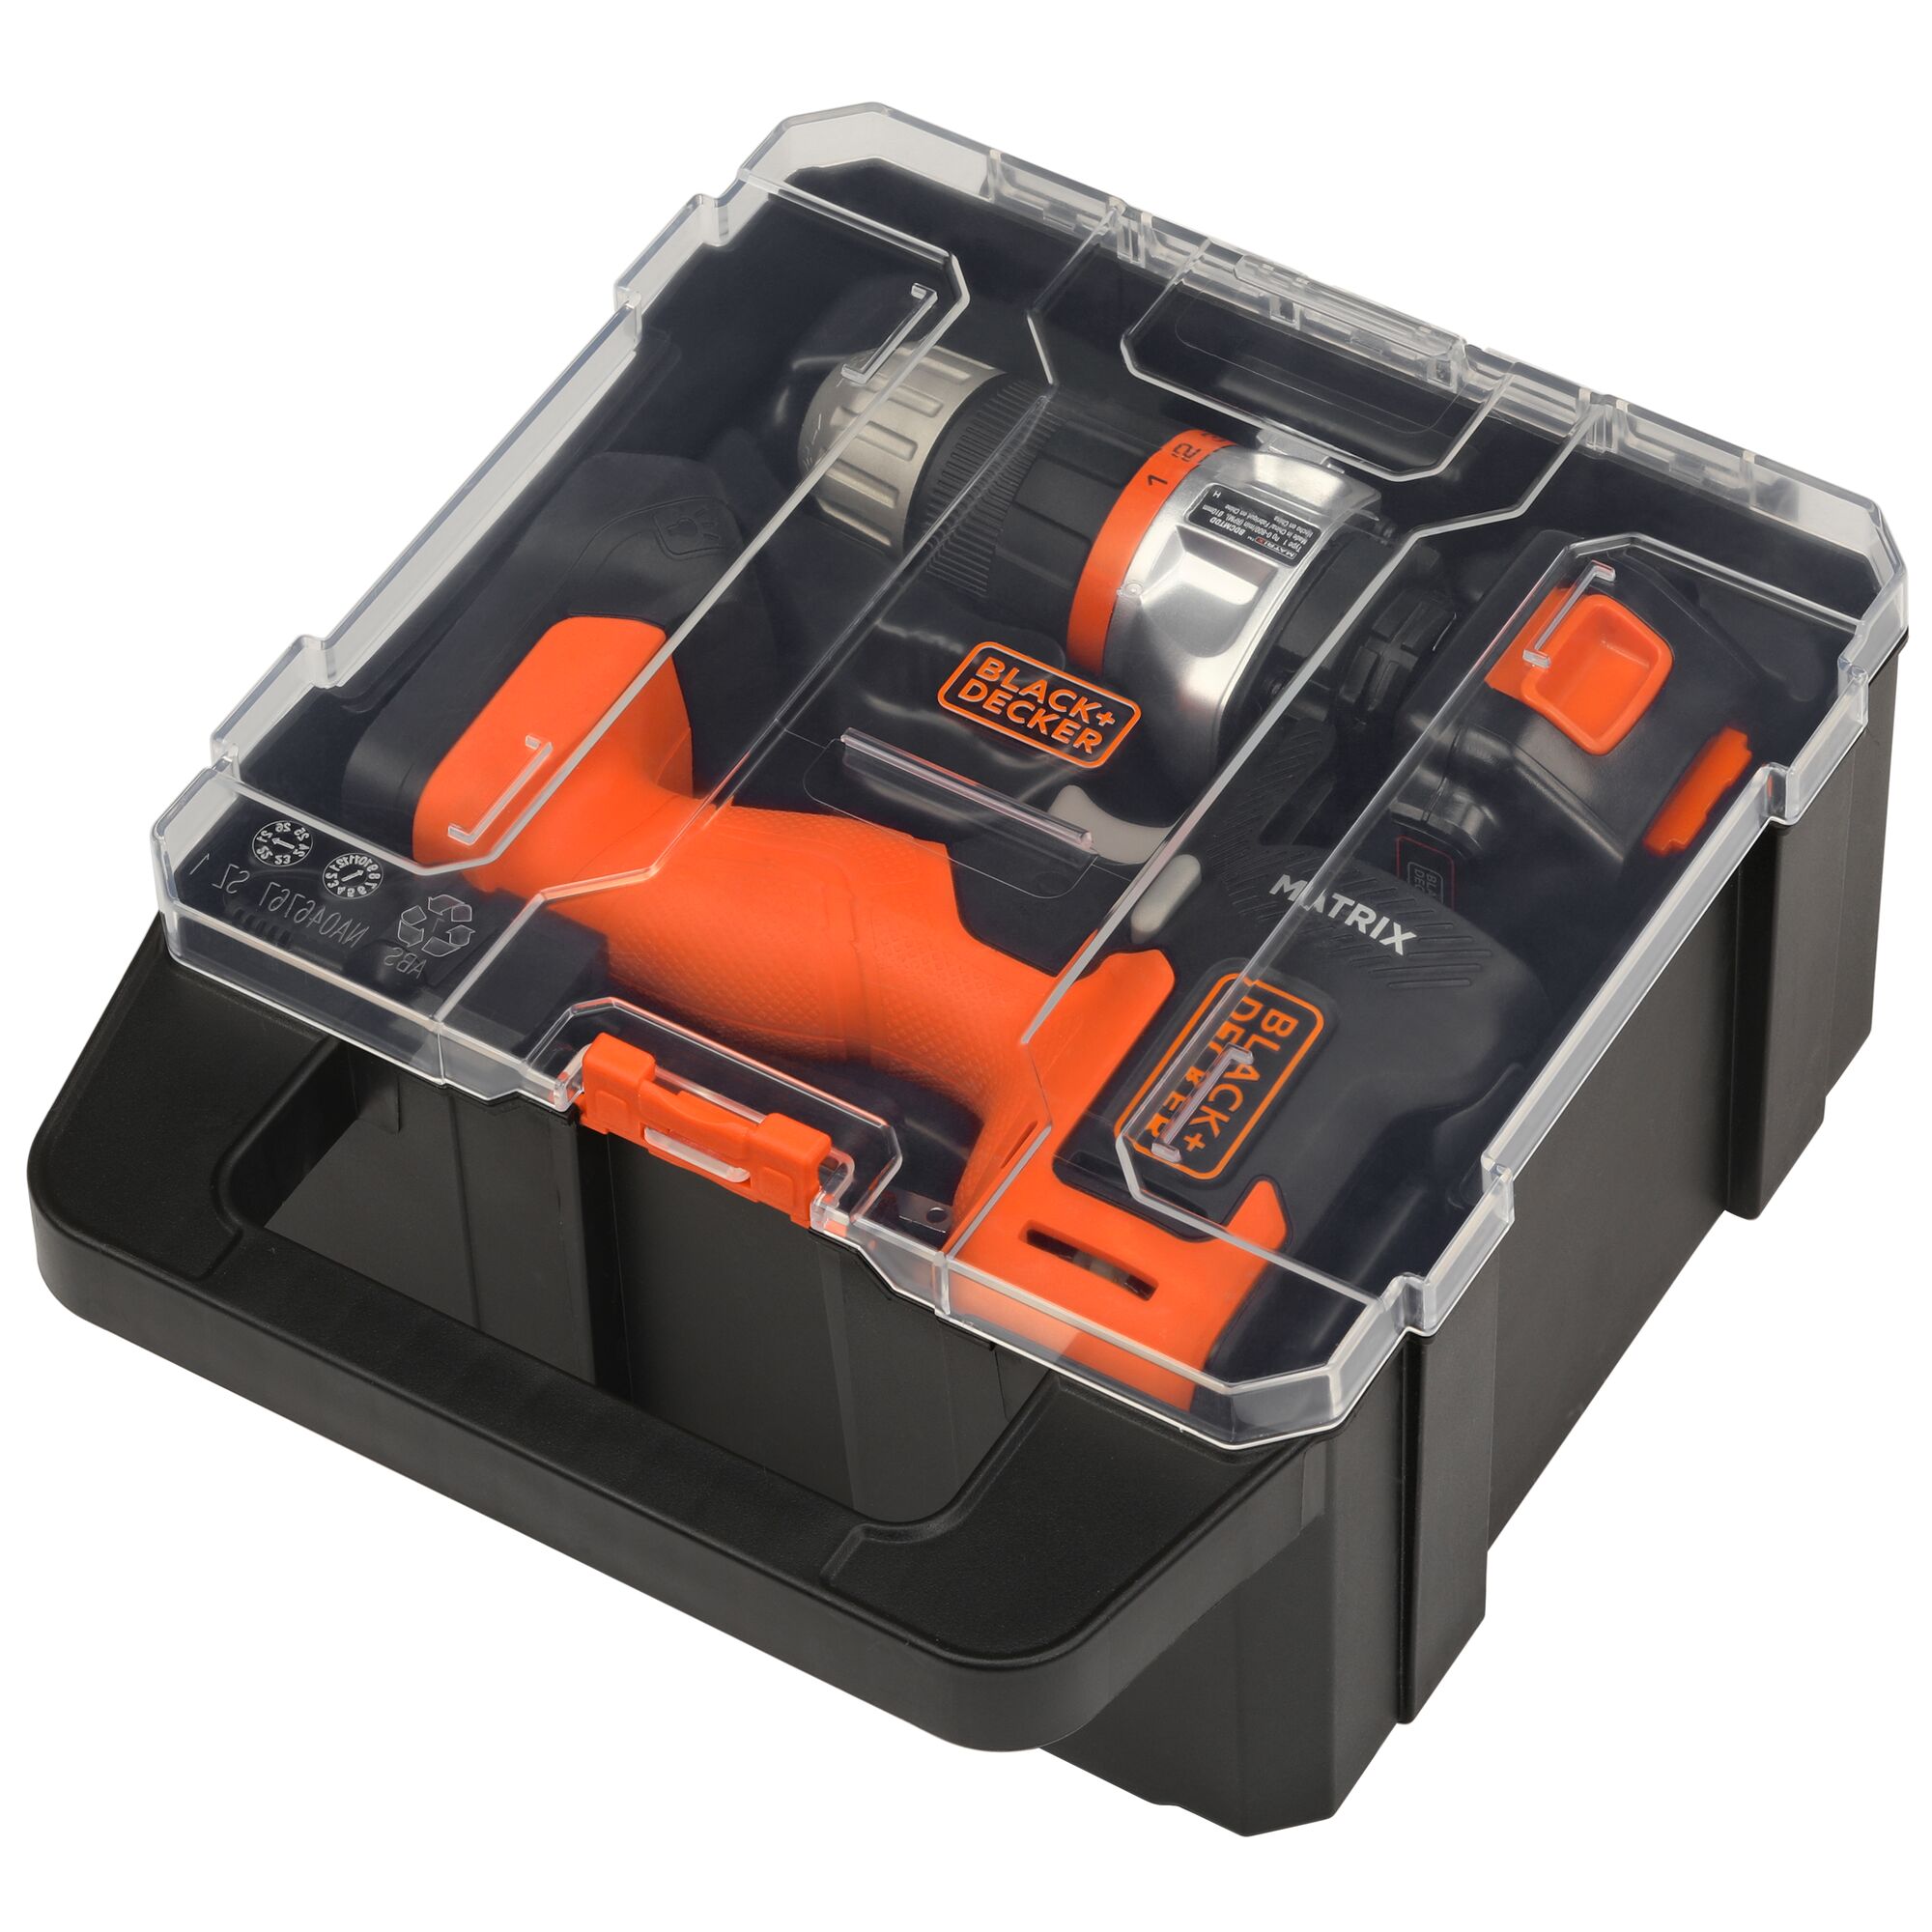 BLACK+DECKER 1-Tool Power Tool Combo Kit with Hard Case (1-Battery